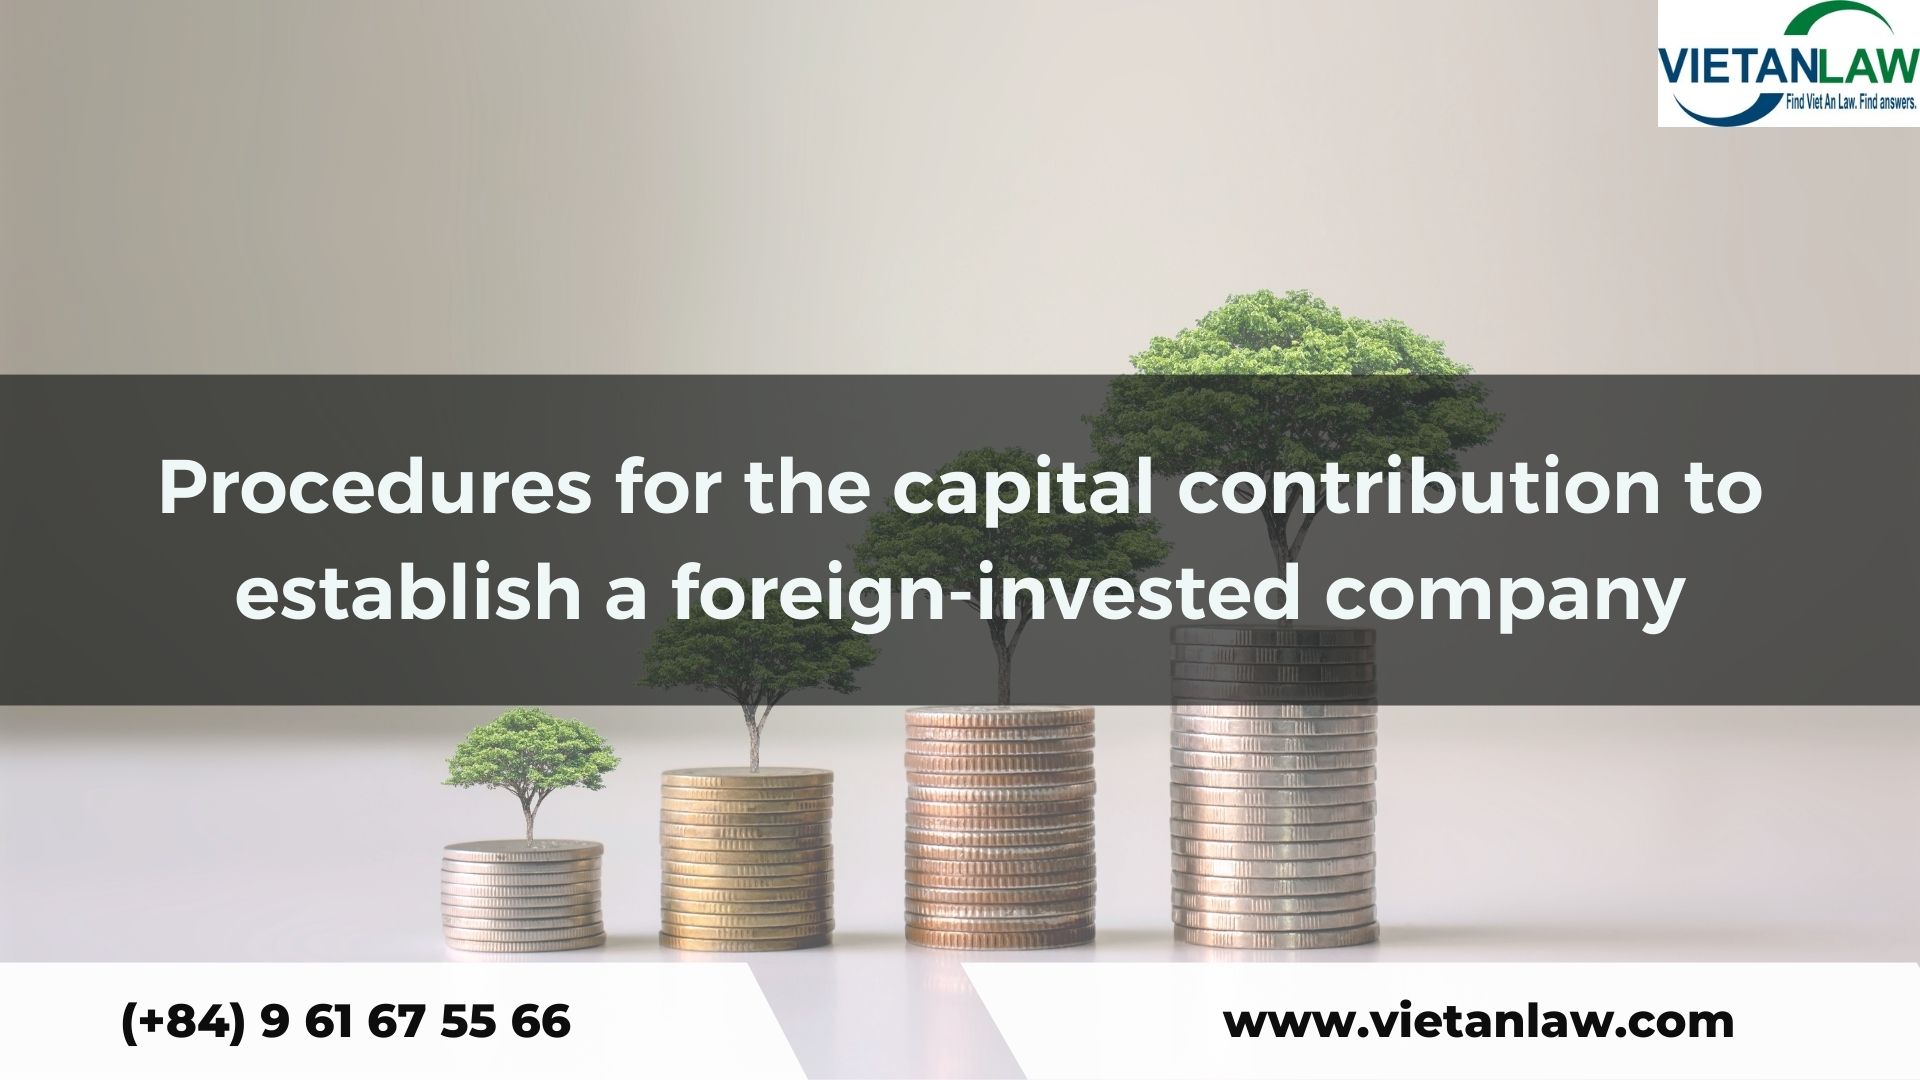 Procedures for the capital contribution to establish a foreign-invested company in Vietnam